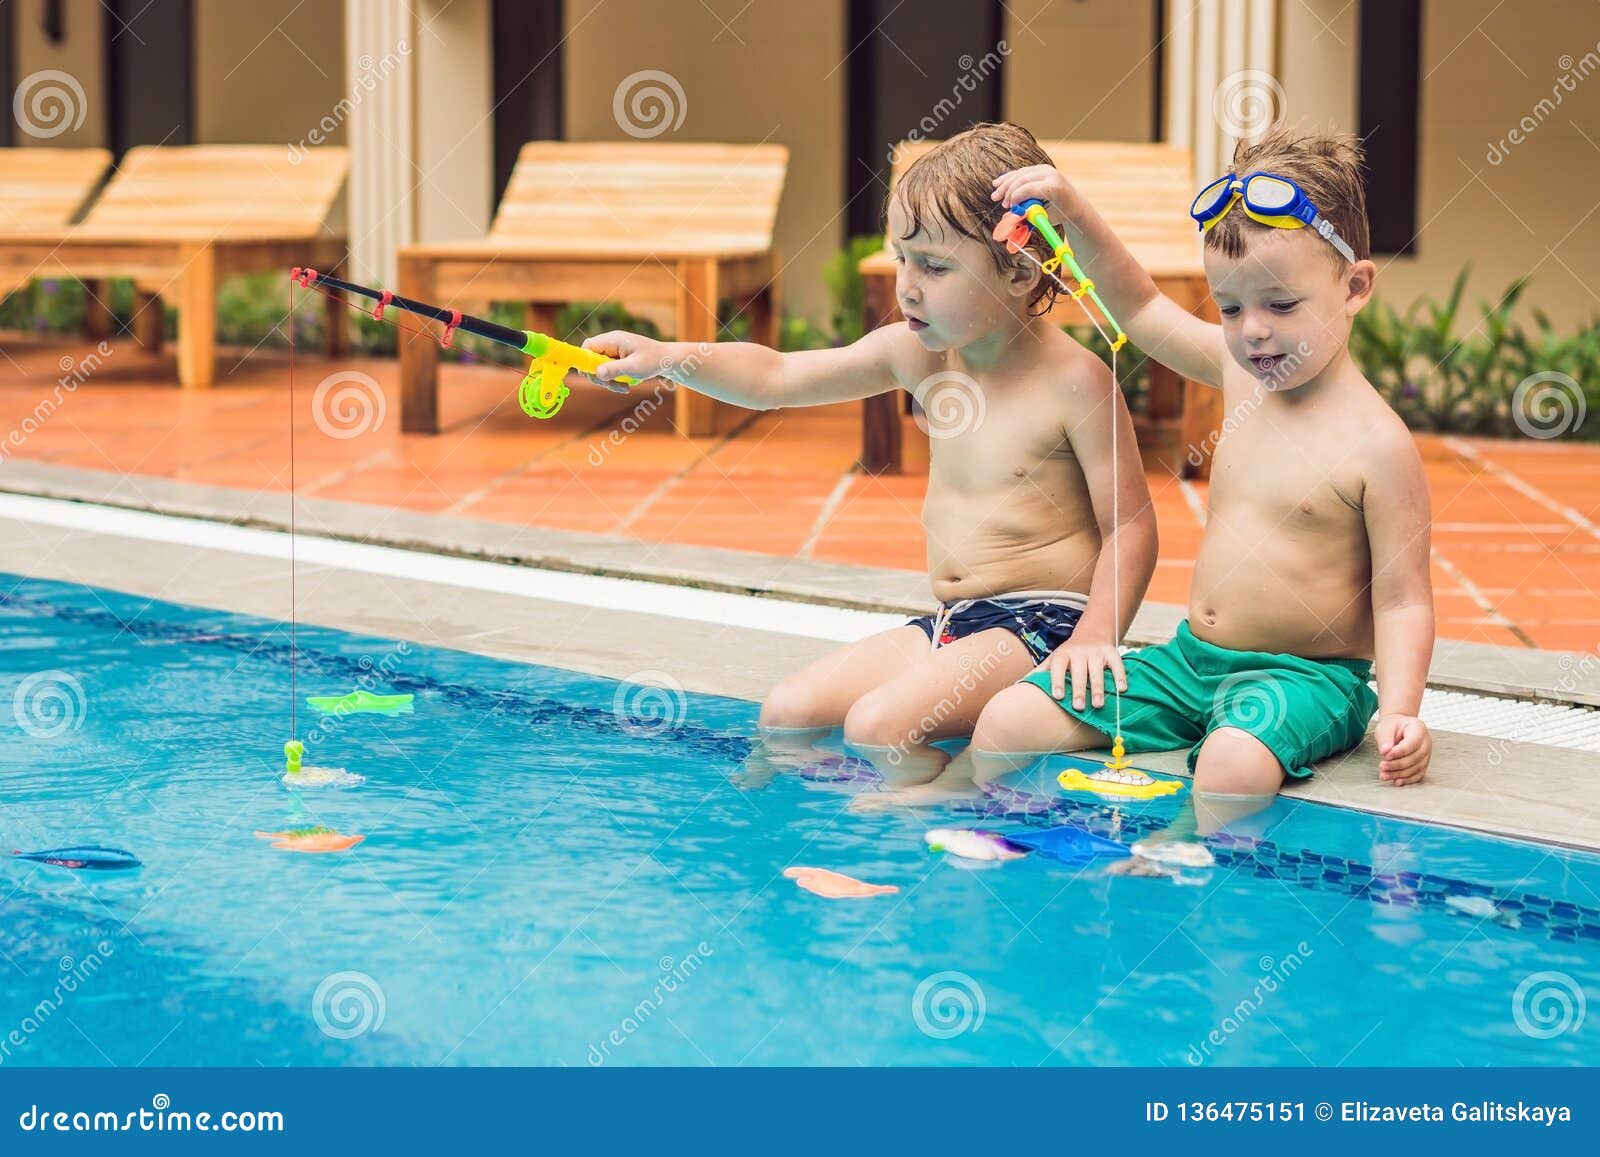 Two Little Cute Boy is Catching a Toy Fish in the Pool Stock Image - Image  of happiness, emotional: 136475151